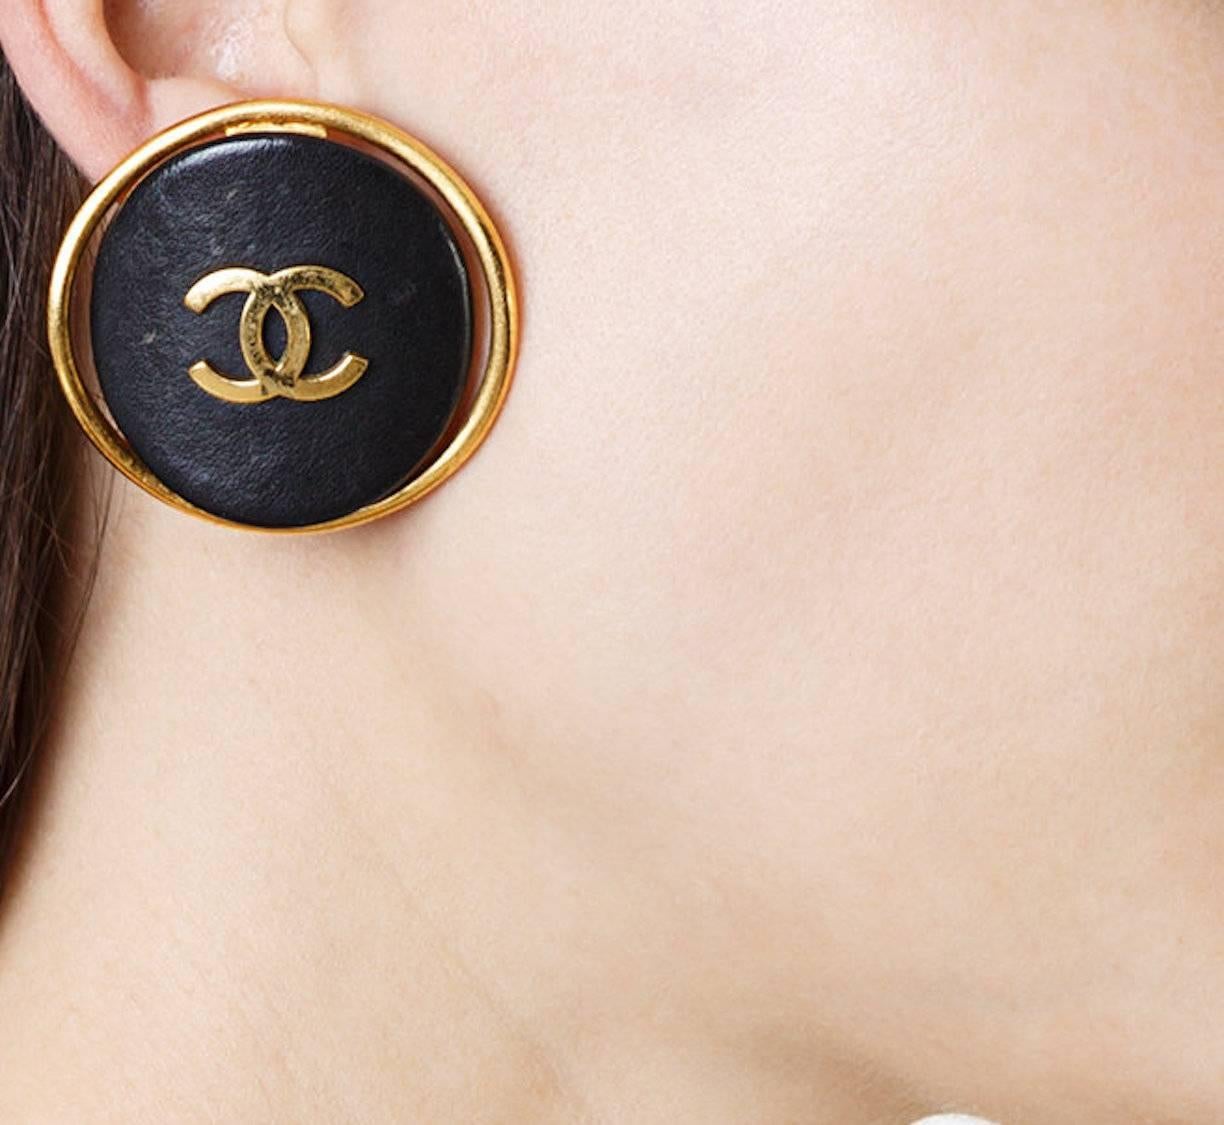 Chanel Vintage Rare Charm Leather Round Button Stud Cage Evening Earrings in Box
Leather
Metal
Gold tone
Clip on closure
Made in France
Measures 1.5